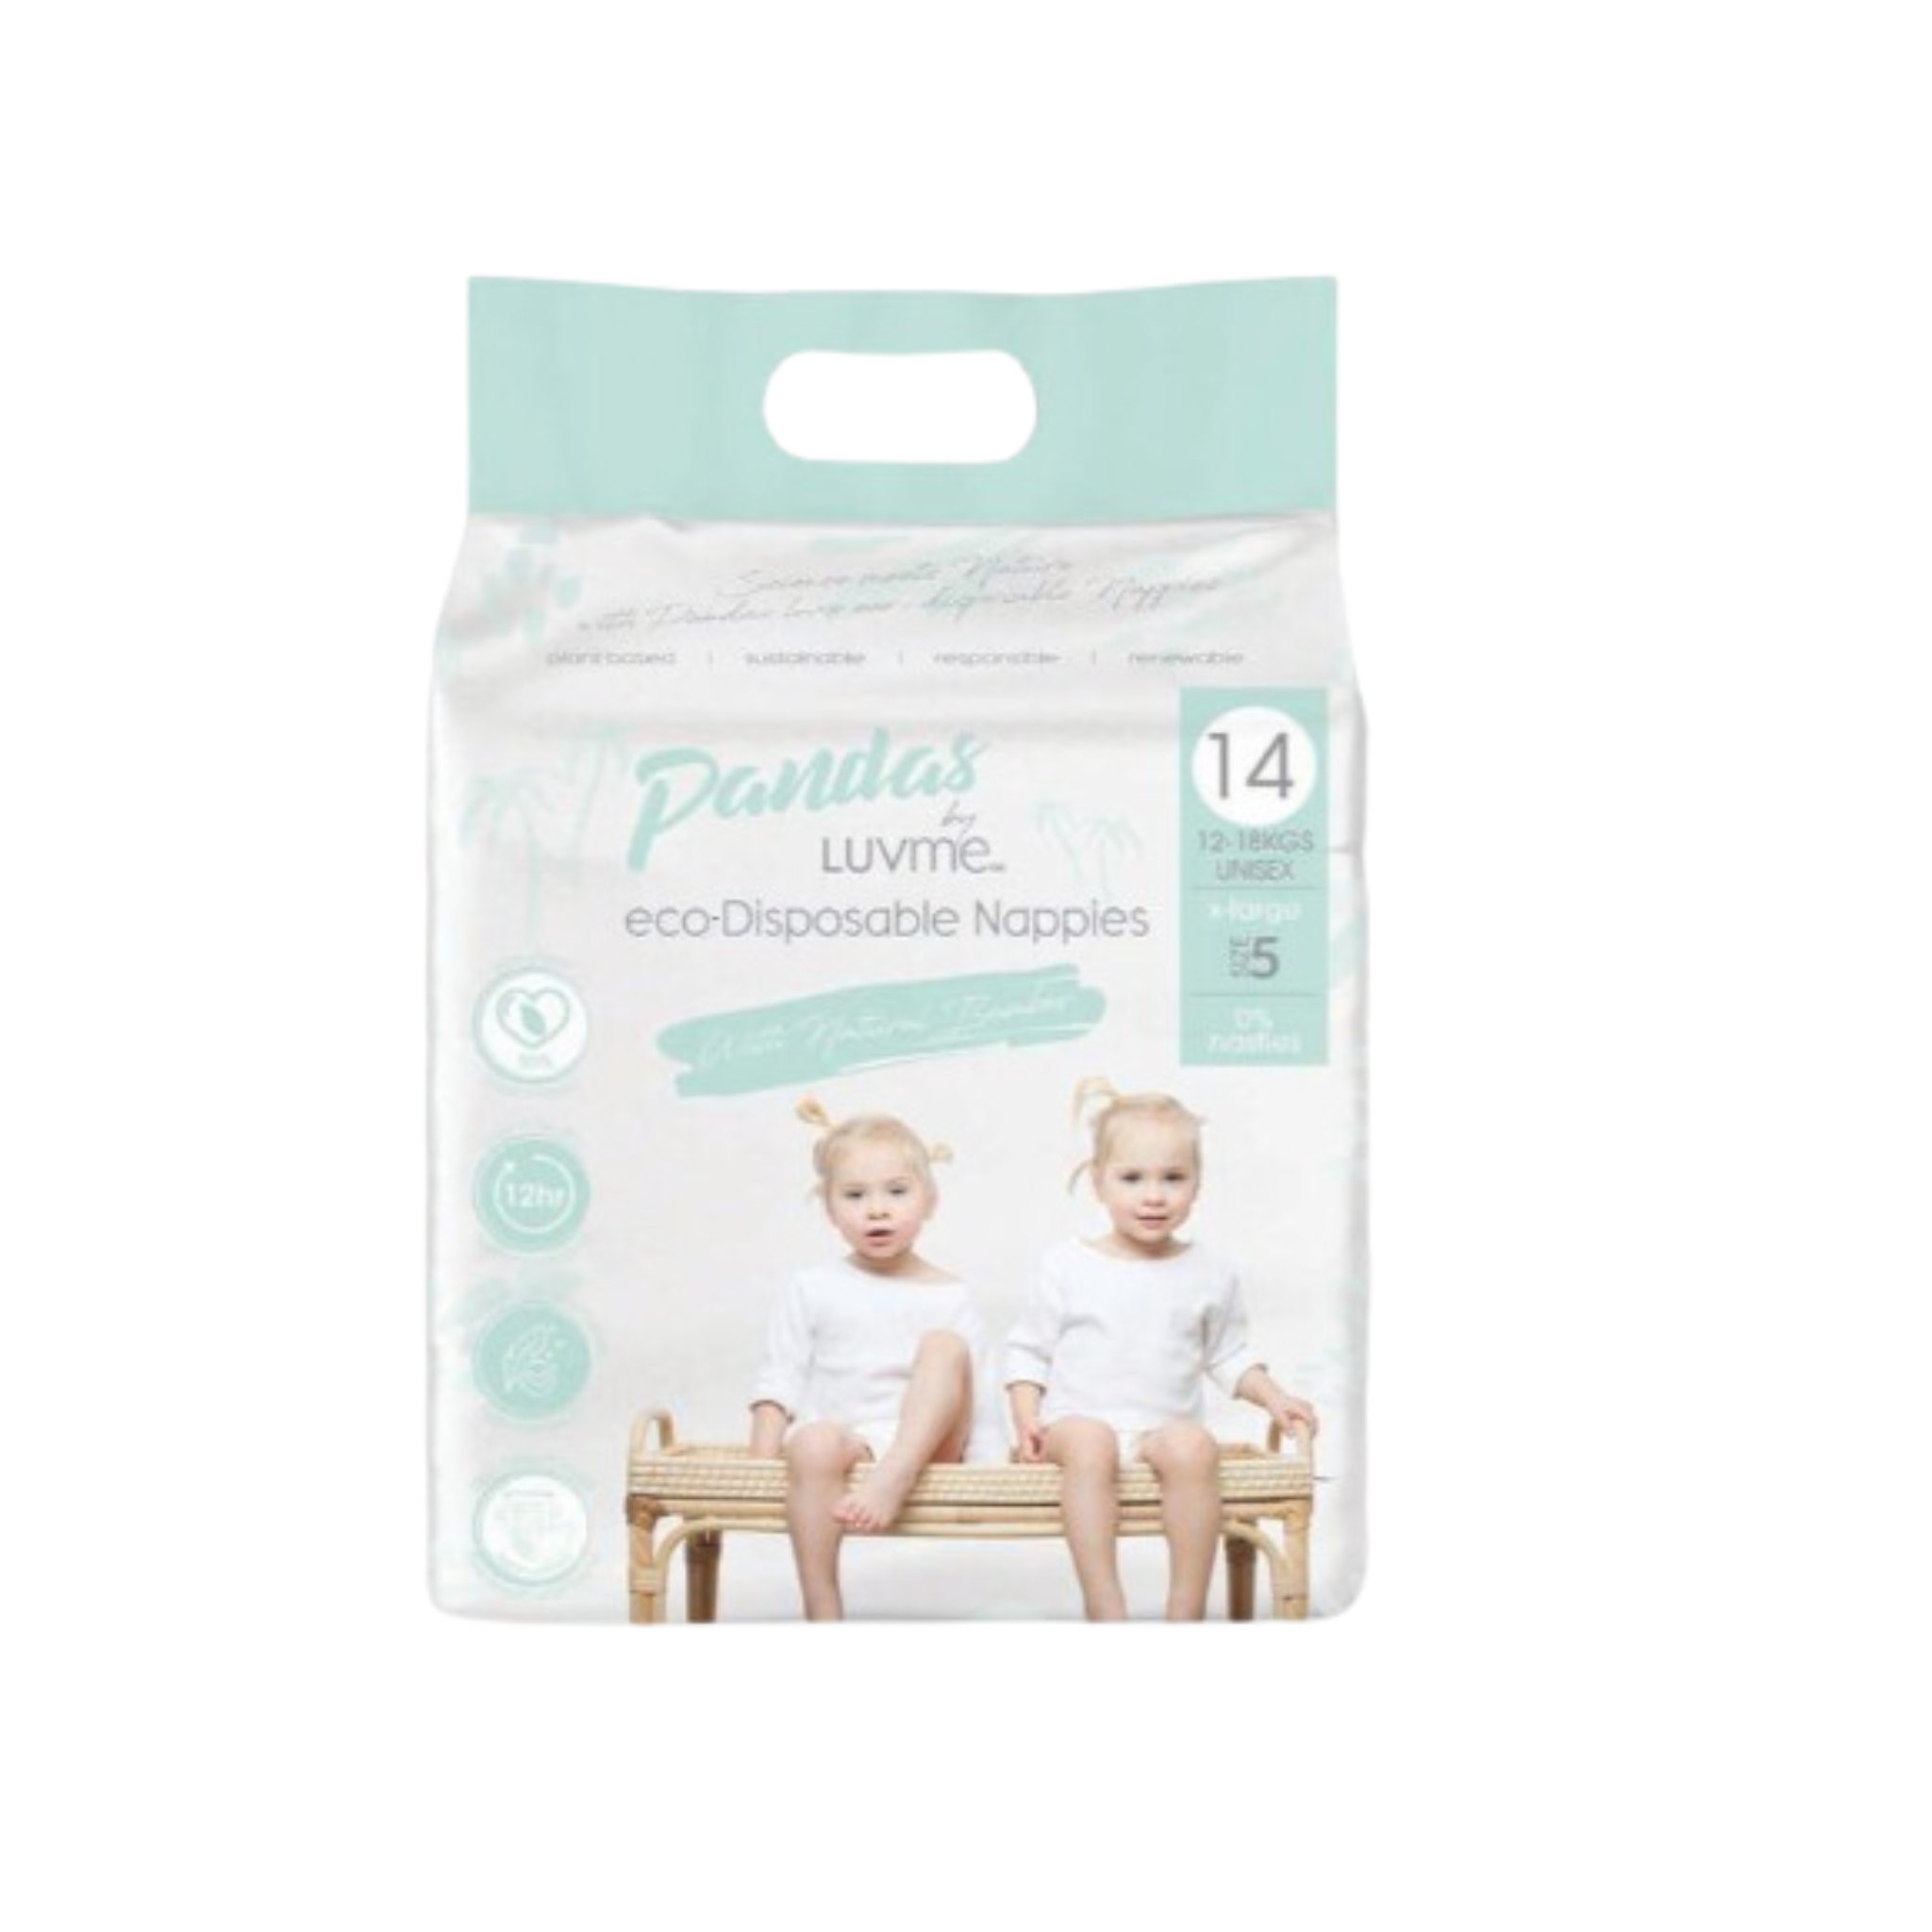 Luvme Nappies 4x14's - Extra Large